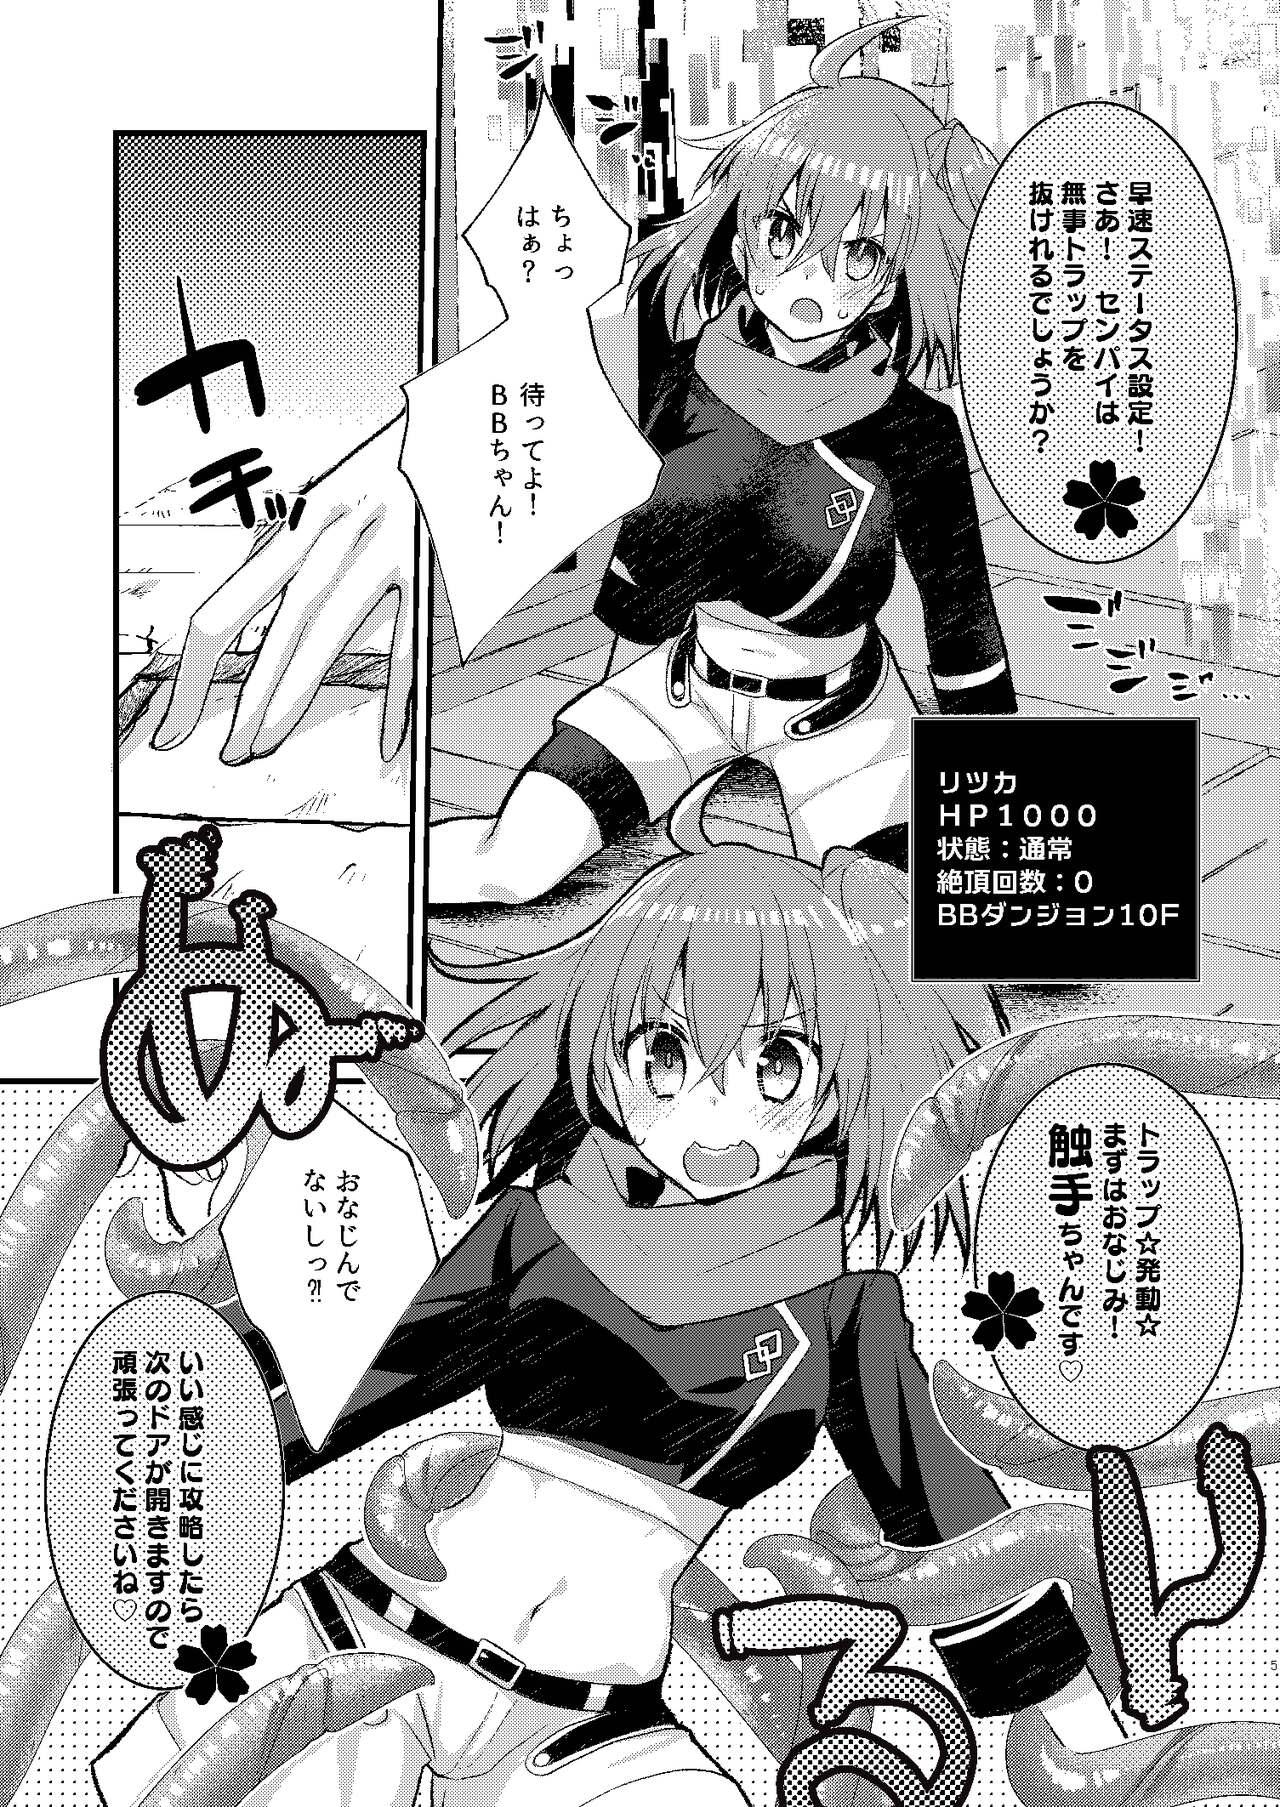 Climax BB-chan to Ero Trap Dungeon - Fate grand order Analplay - Page 5